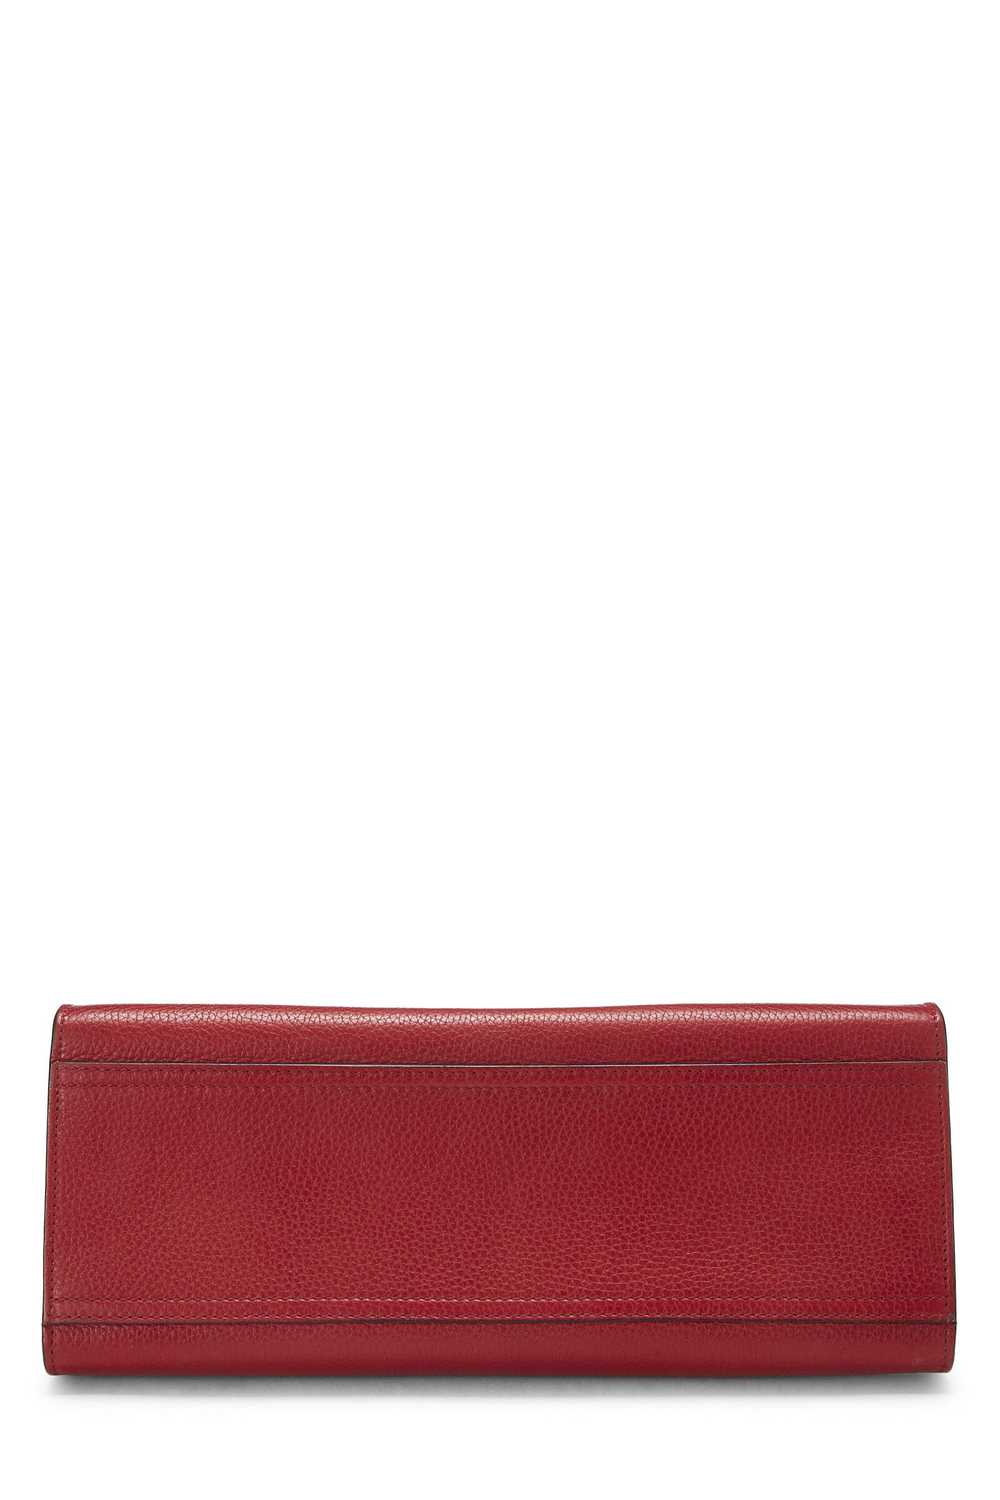 Red Leather GG Marmont Top Handle Flap Bag Small - image 5